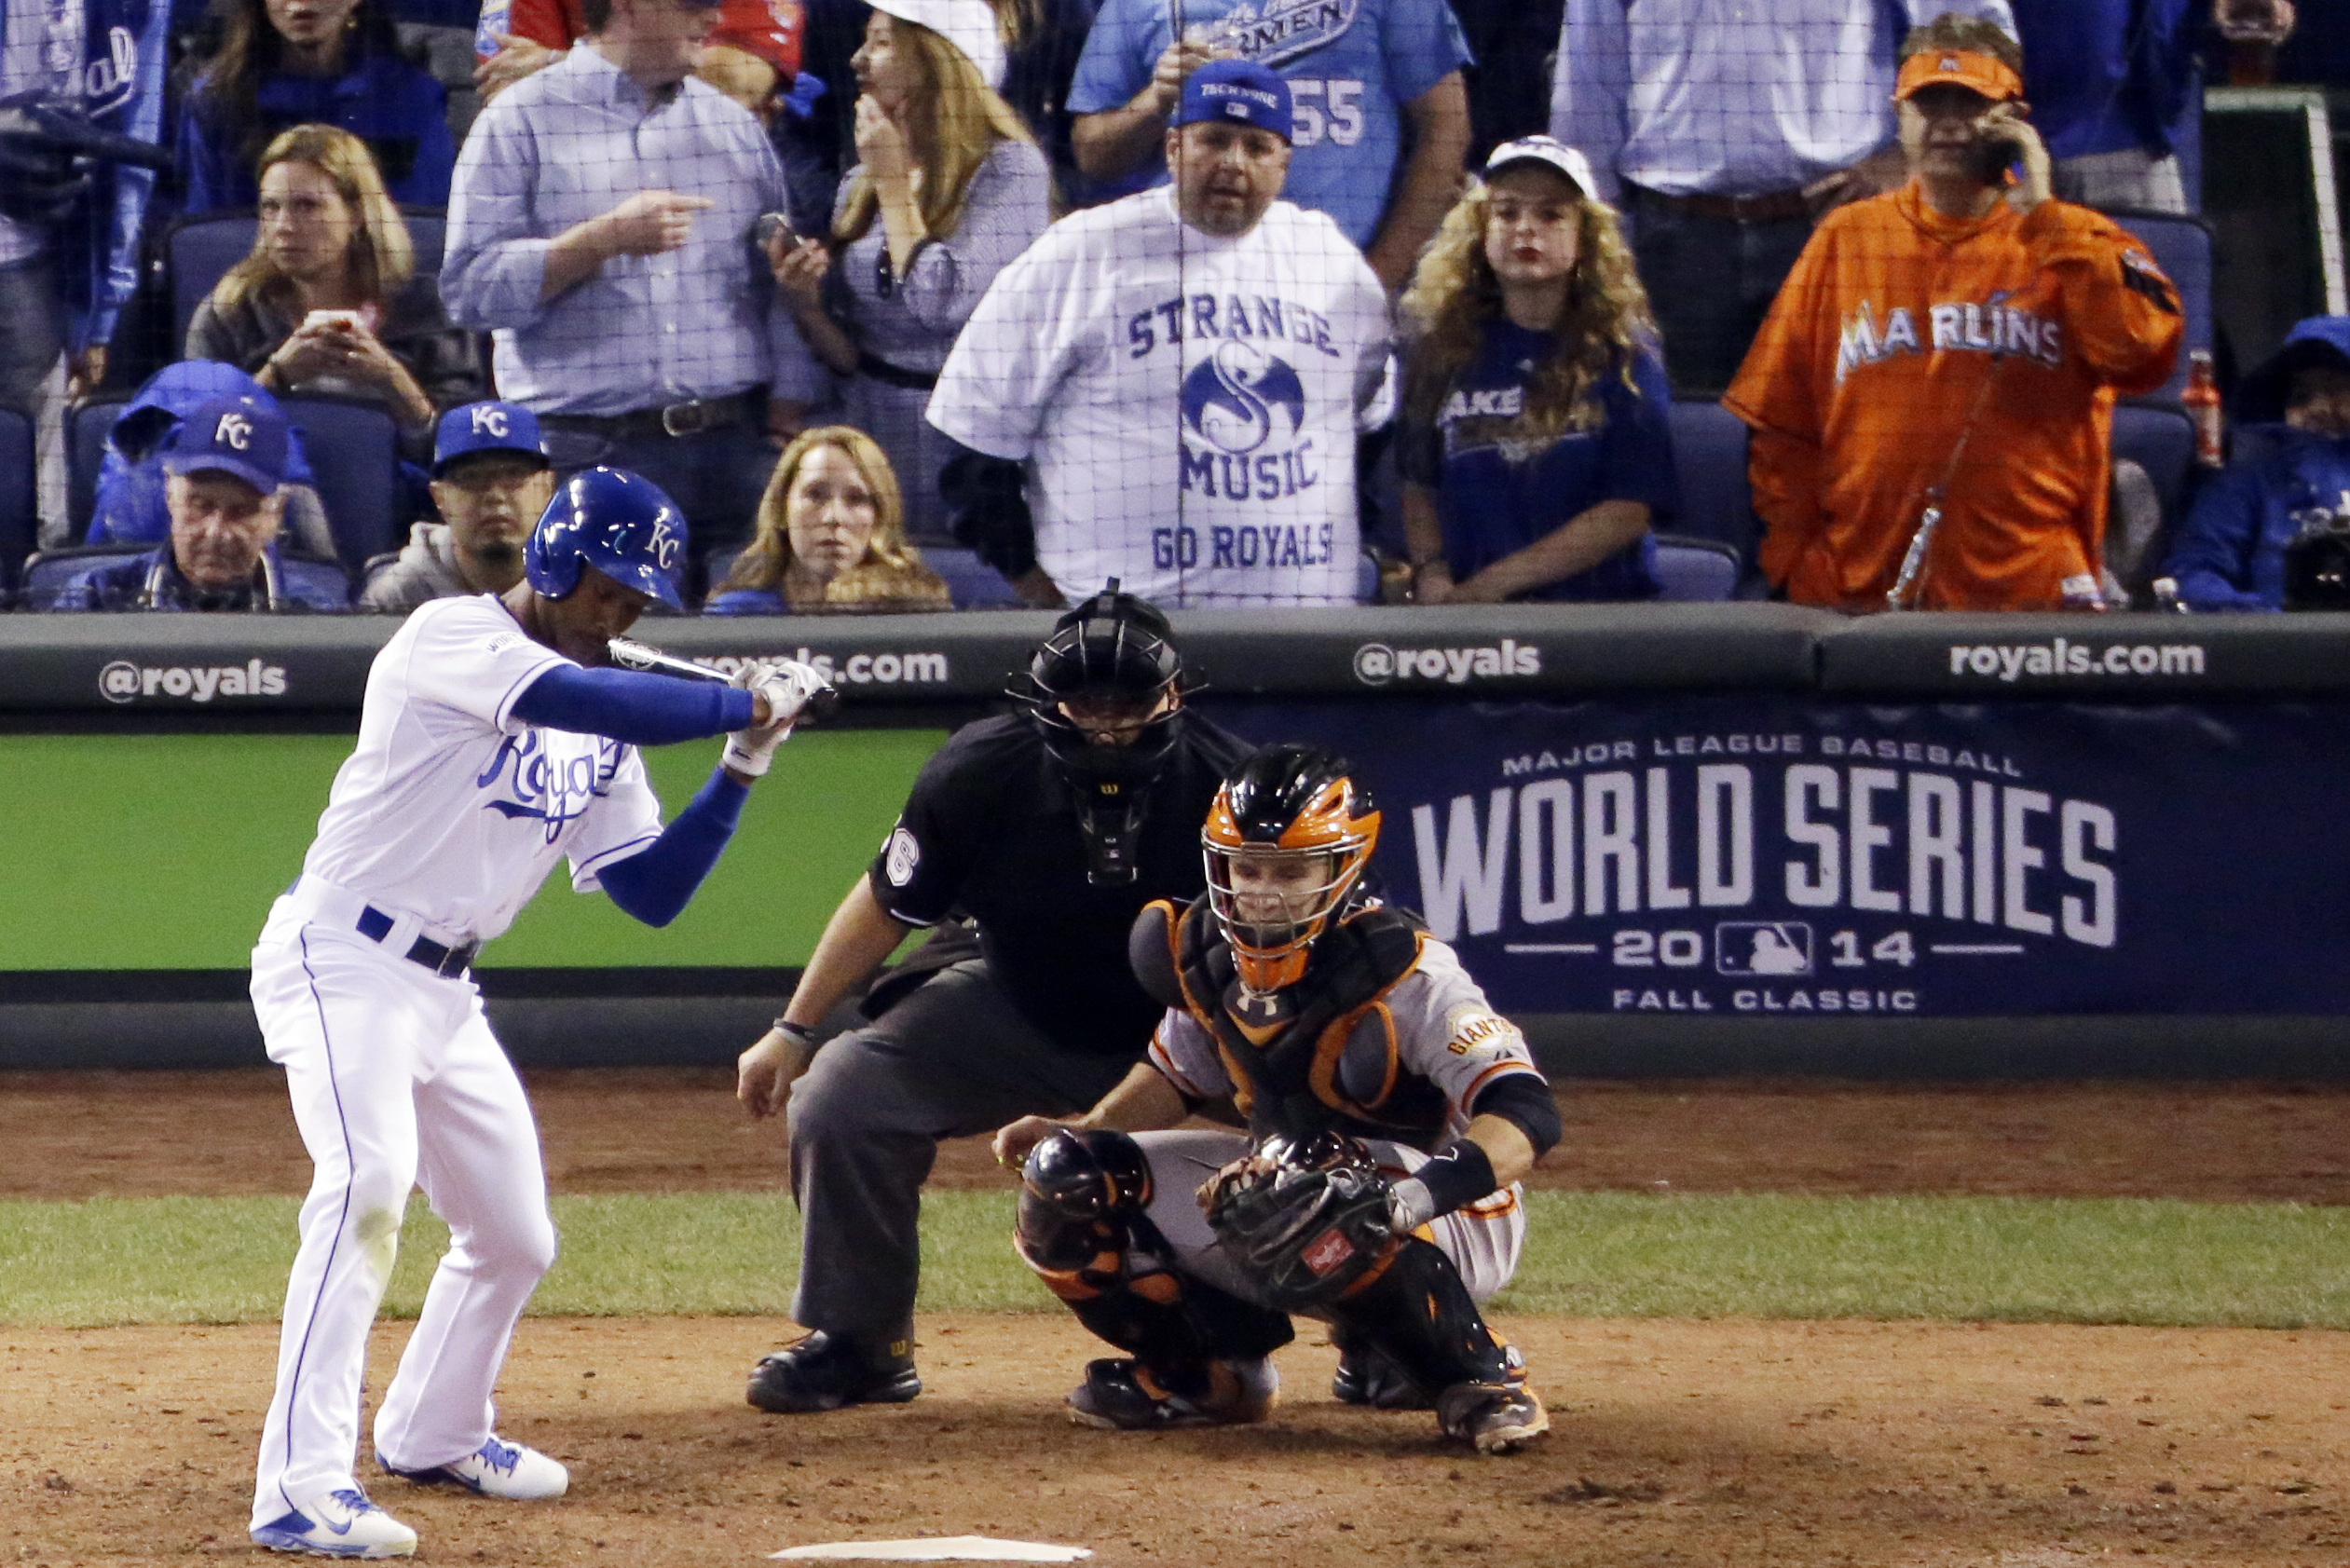 Marlins Man to remain free agent baseball fan, for now